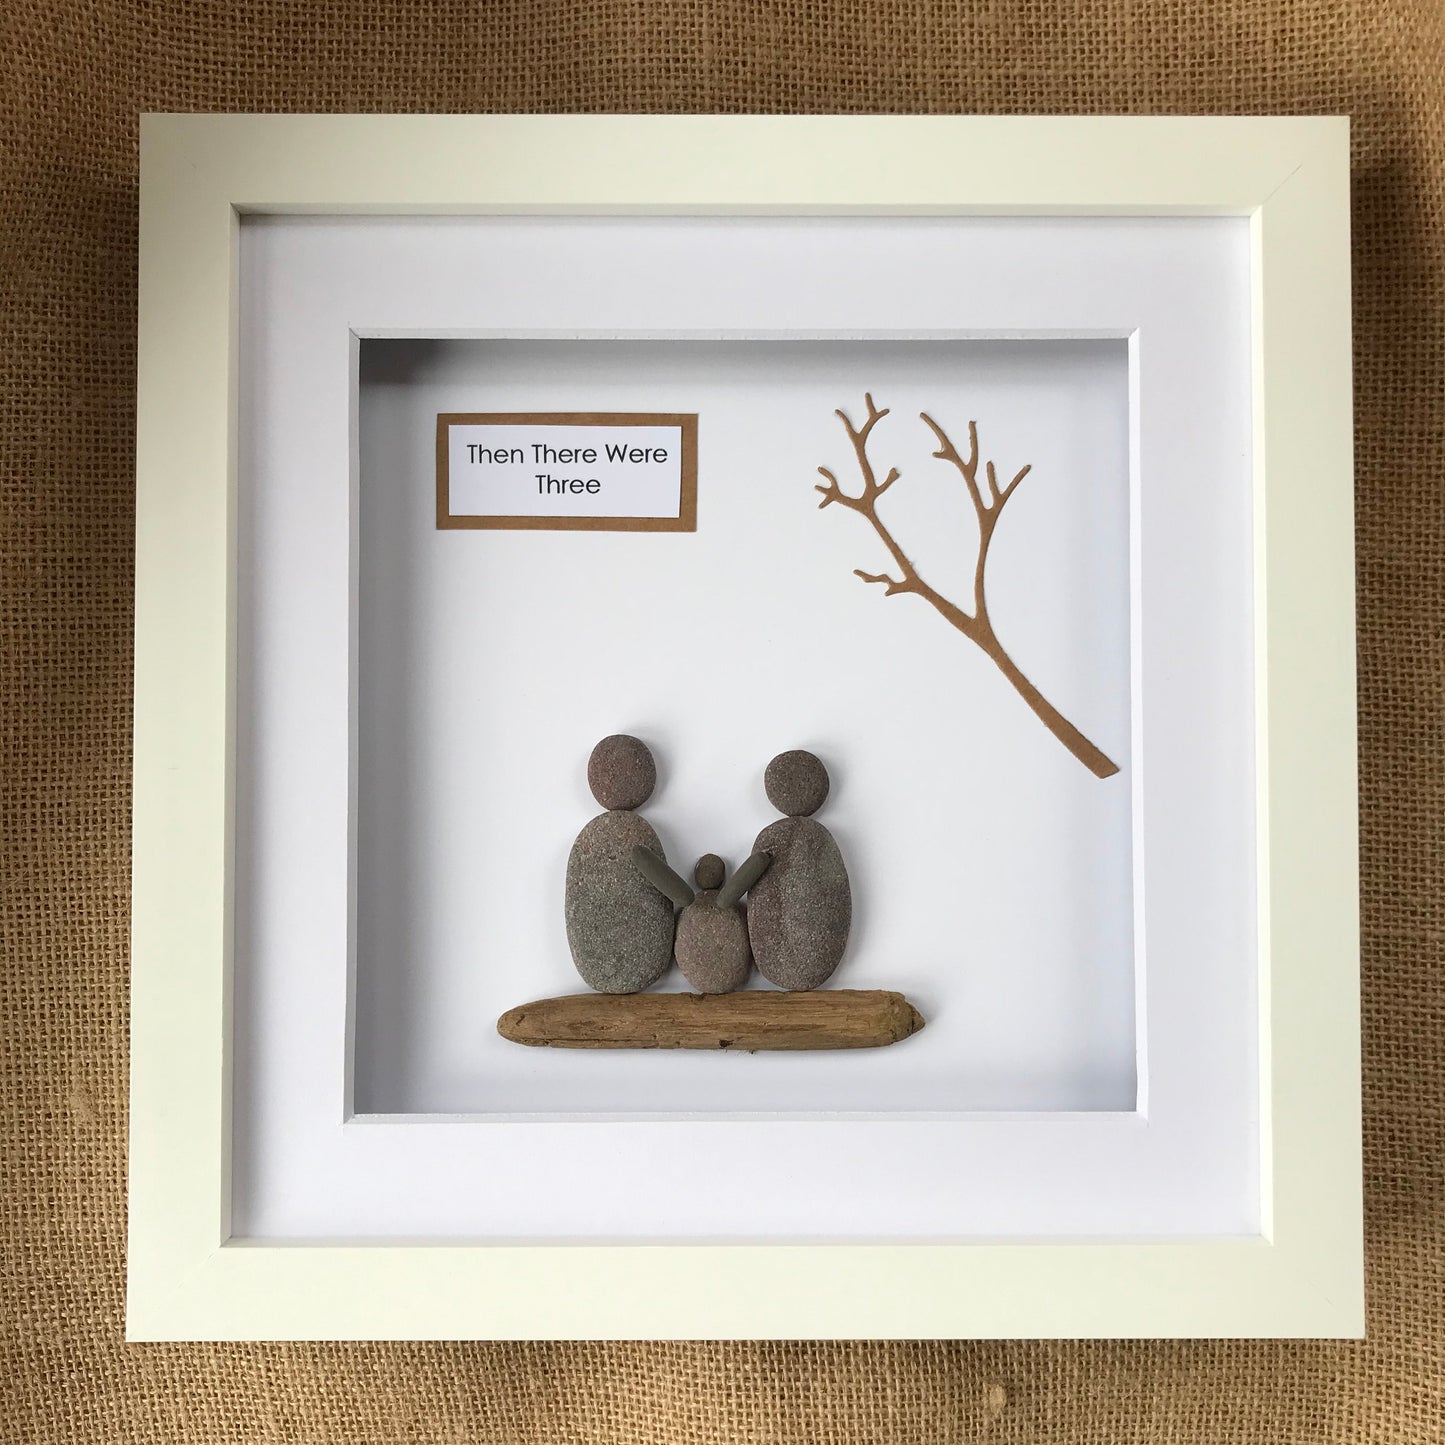 New Family Pebble Art Picture